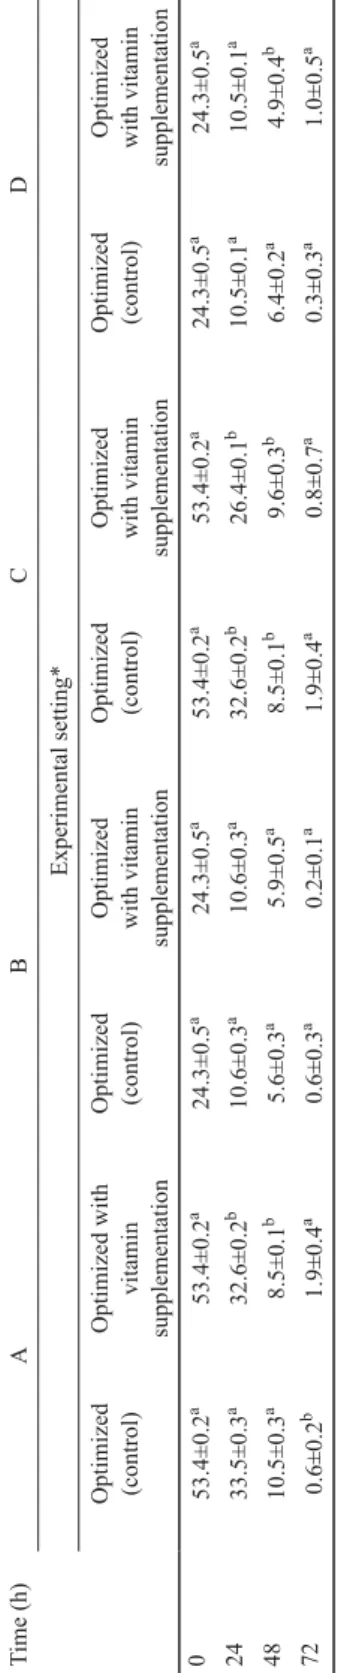 Table 4. Comparing total sugar content of fermentation medium employed during optimized (control) and vitamin supplemented fermentation processes (g/100 g) Time (h) ABCD Experimental setting*  Optimized  (control) Optimized with vitamin  supplementation Op